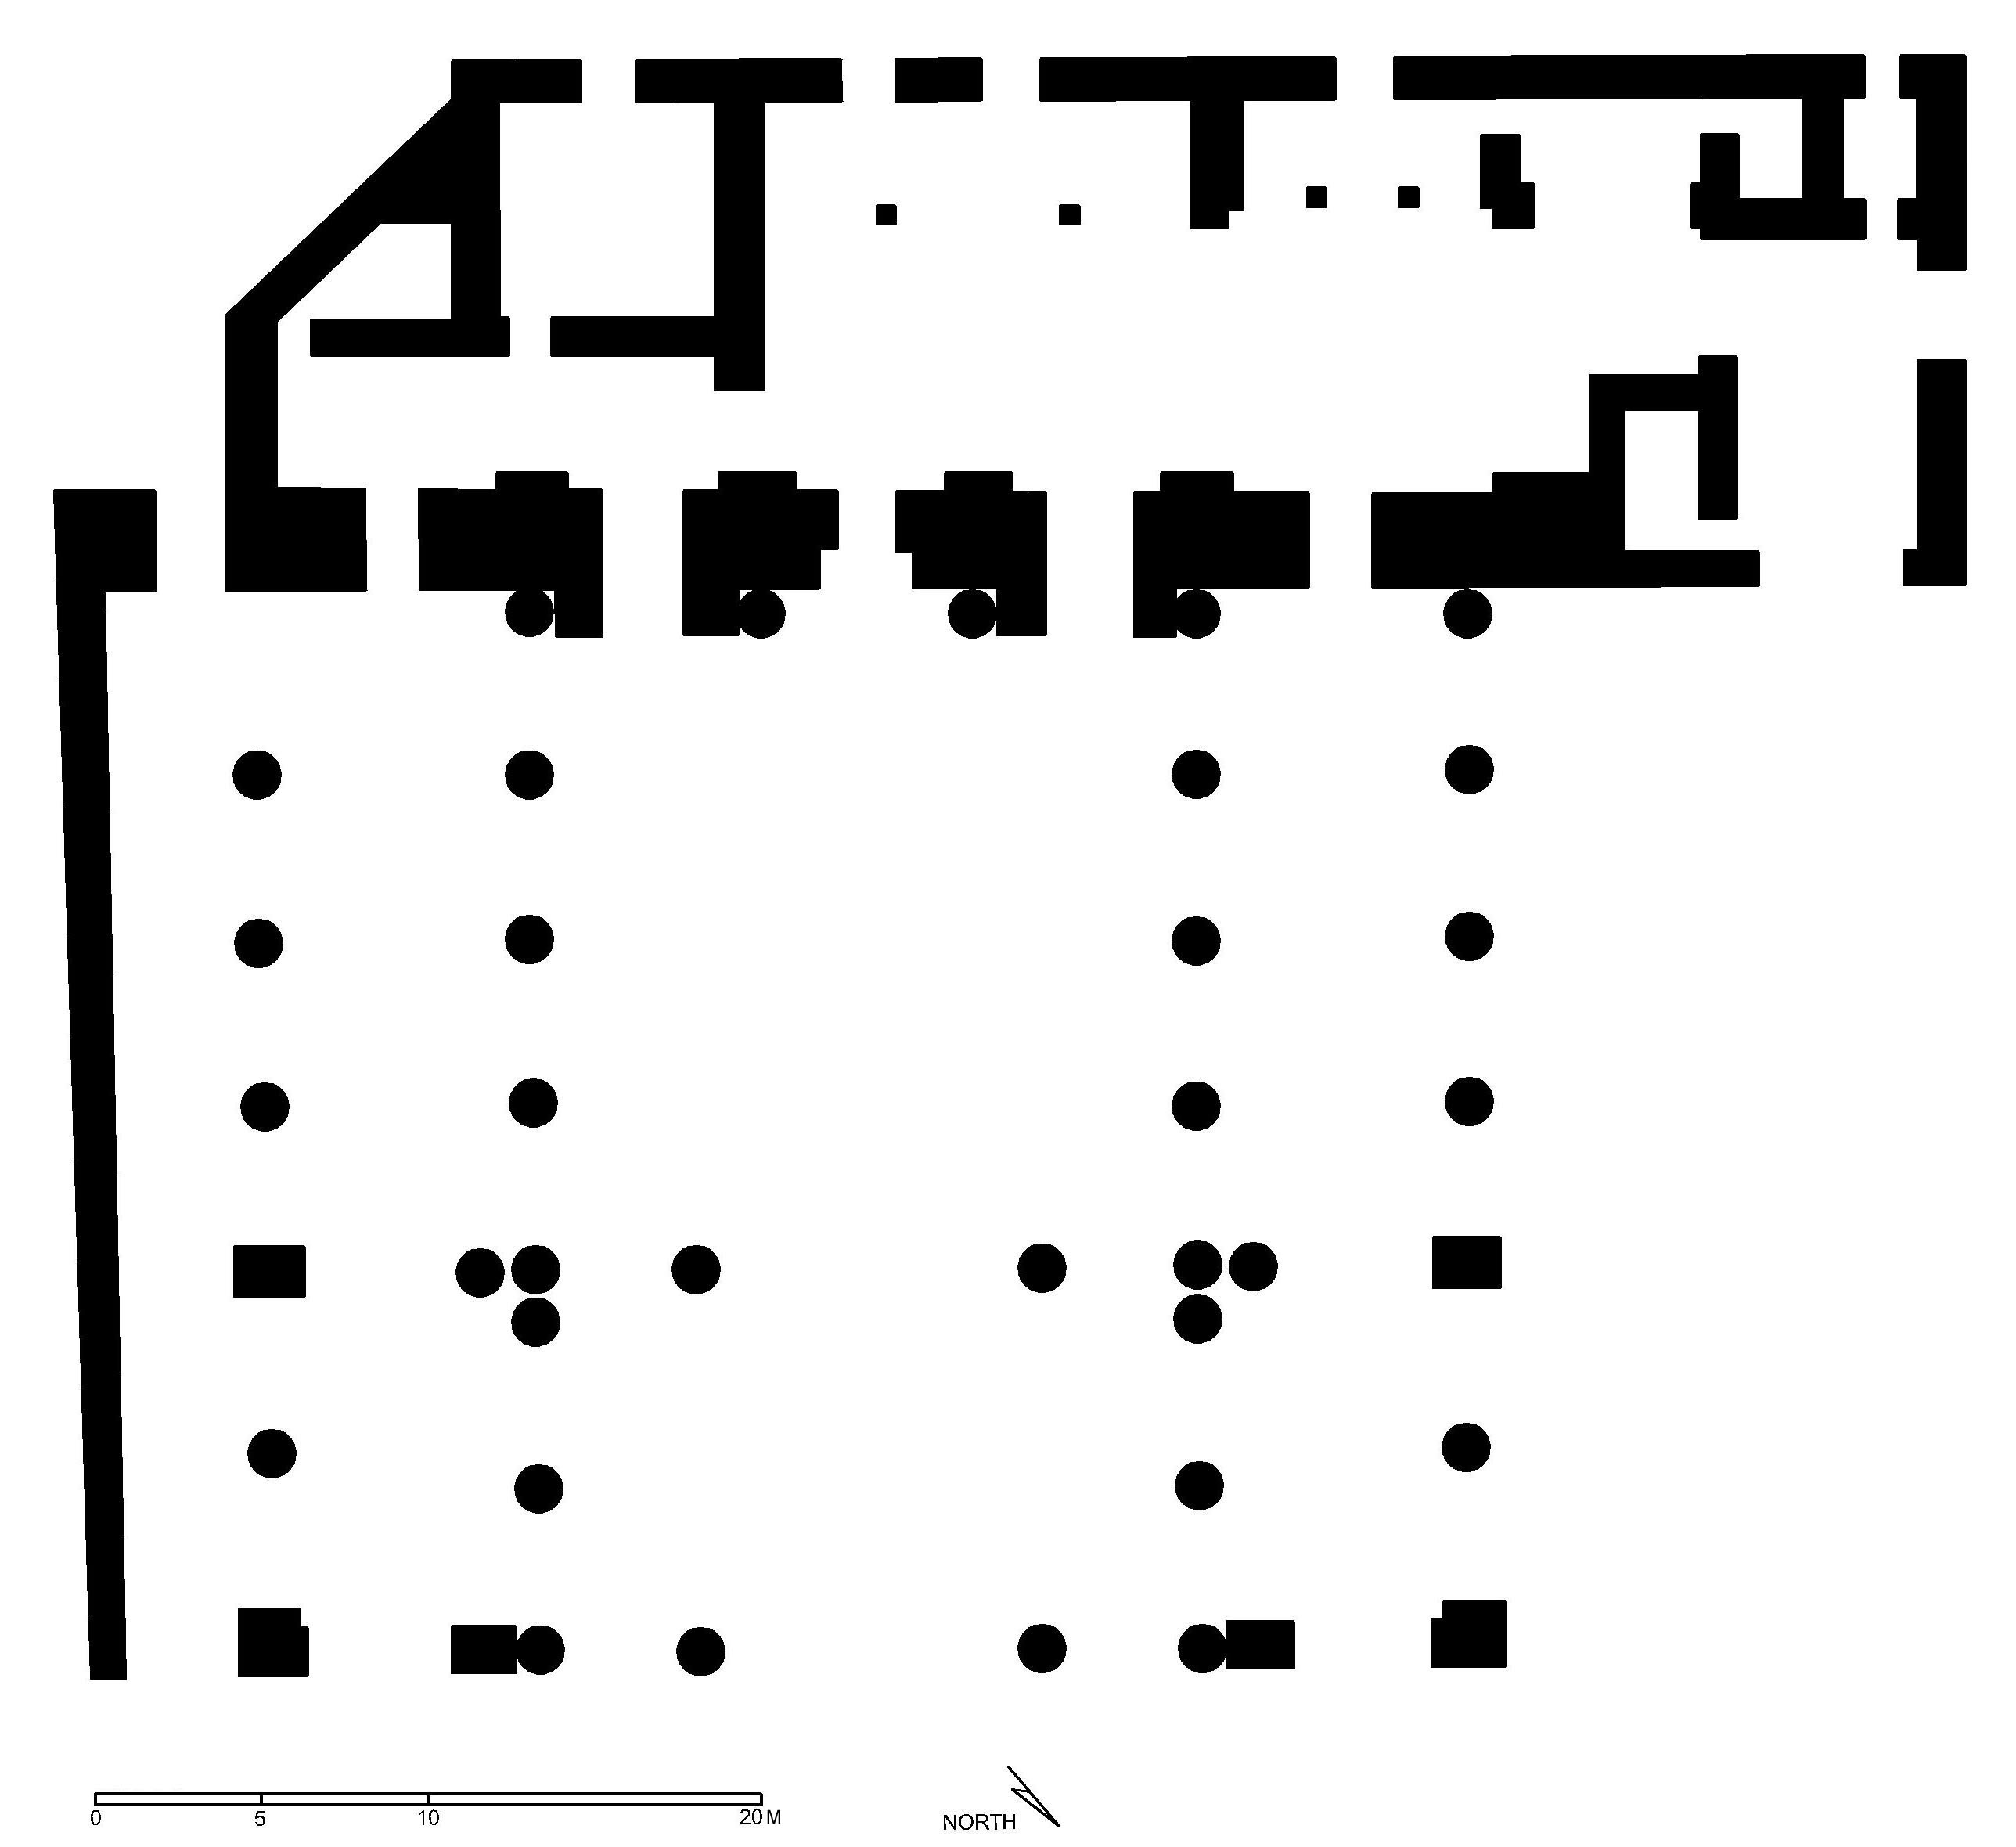 Qal'a (Cairo) - Floor plan of iwan added by Nasr al-Din in 1333 to serve as Audience Hall (after Meinecke) in AutoCAD 2000 format. Click the download button to download a zipped file containing the .dwg file.